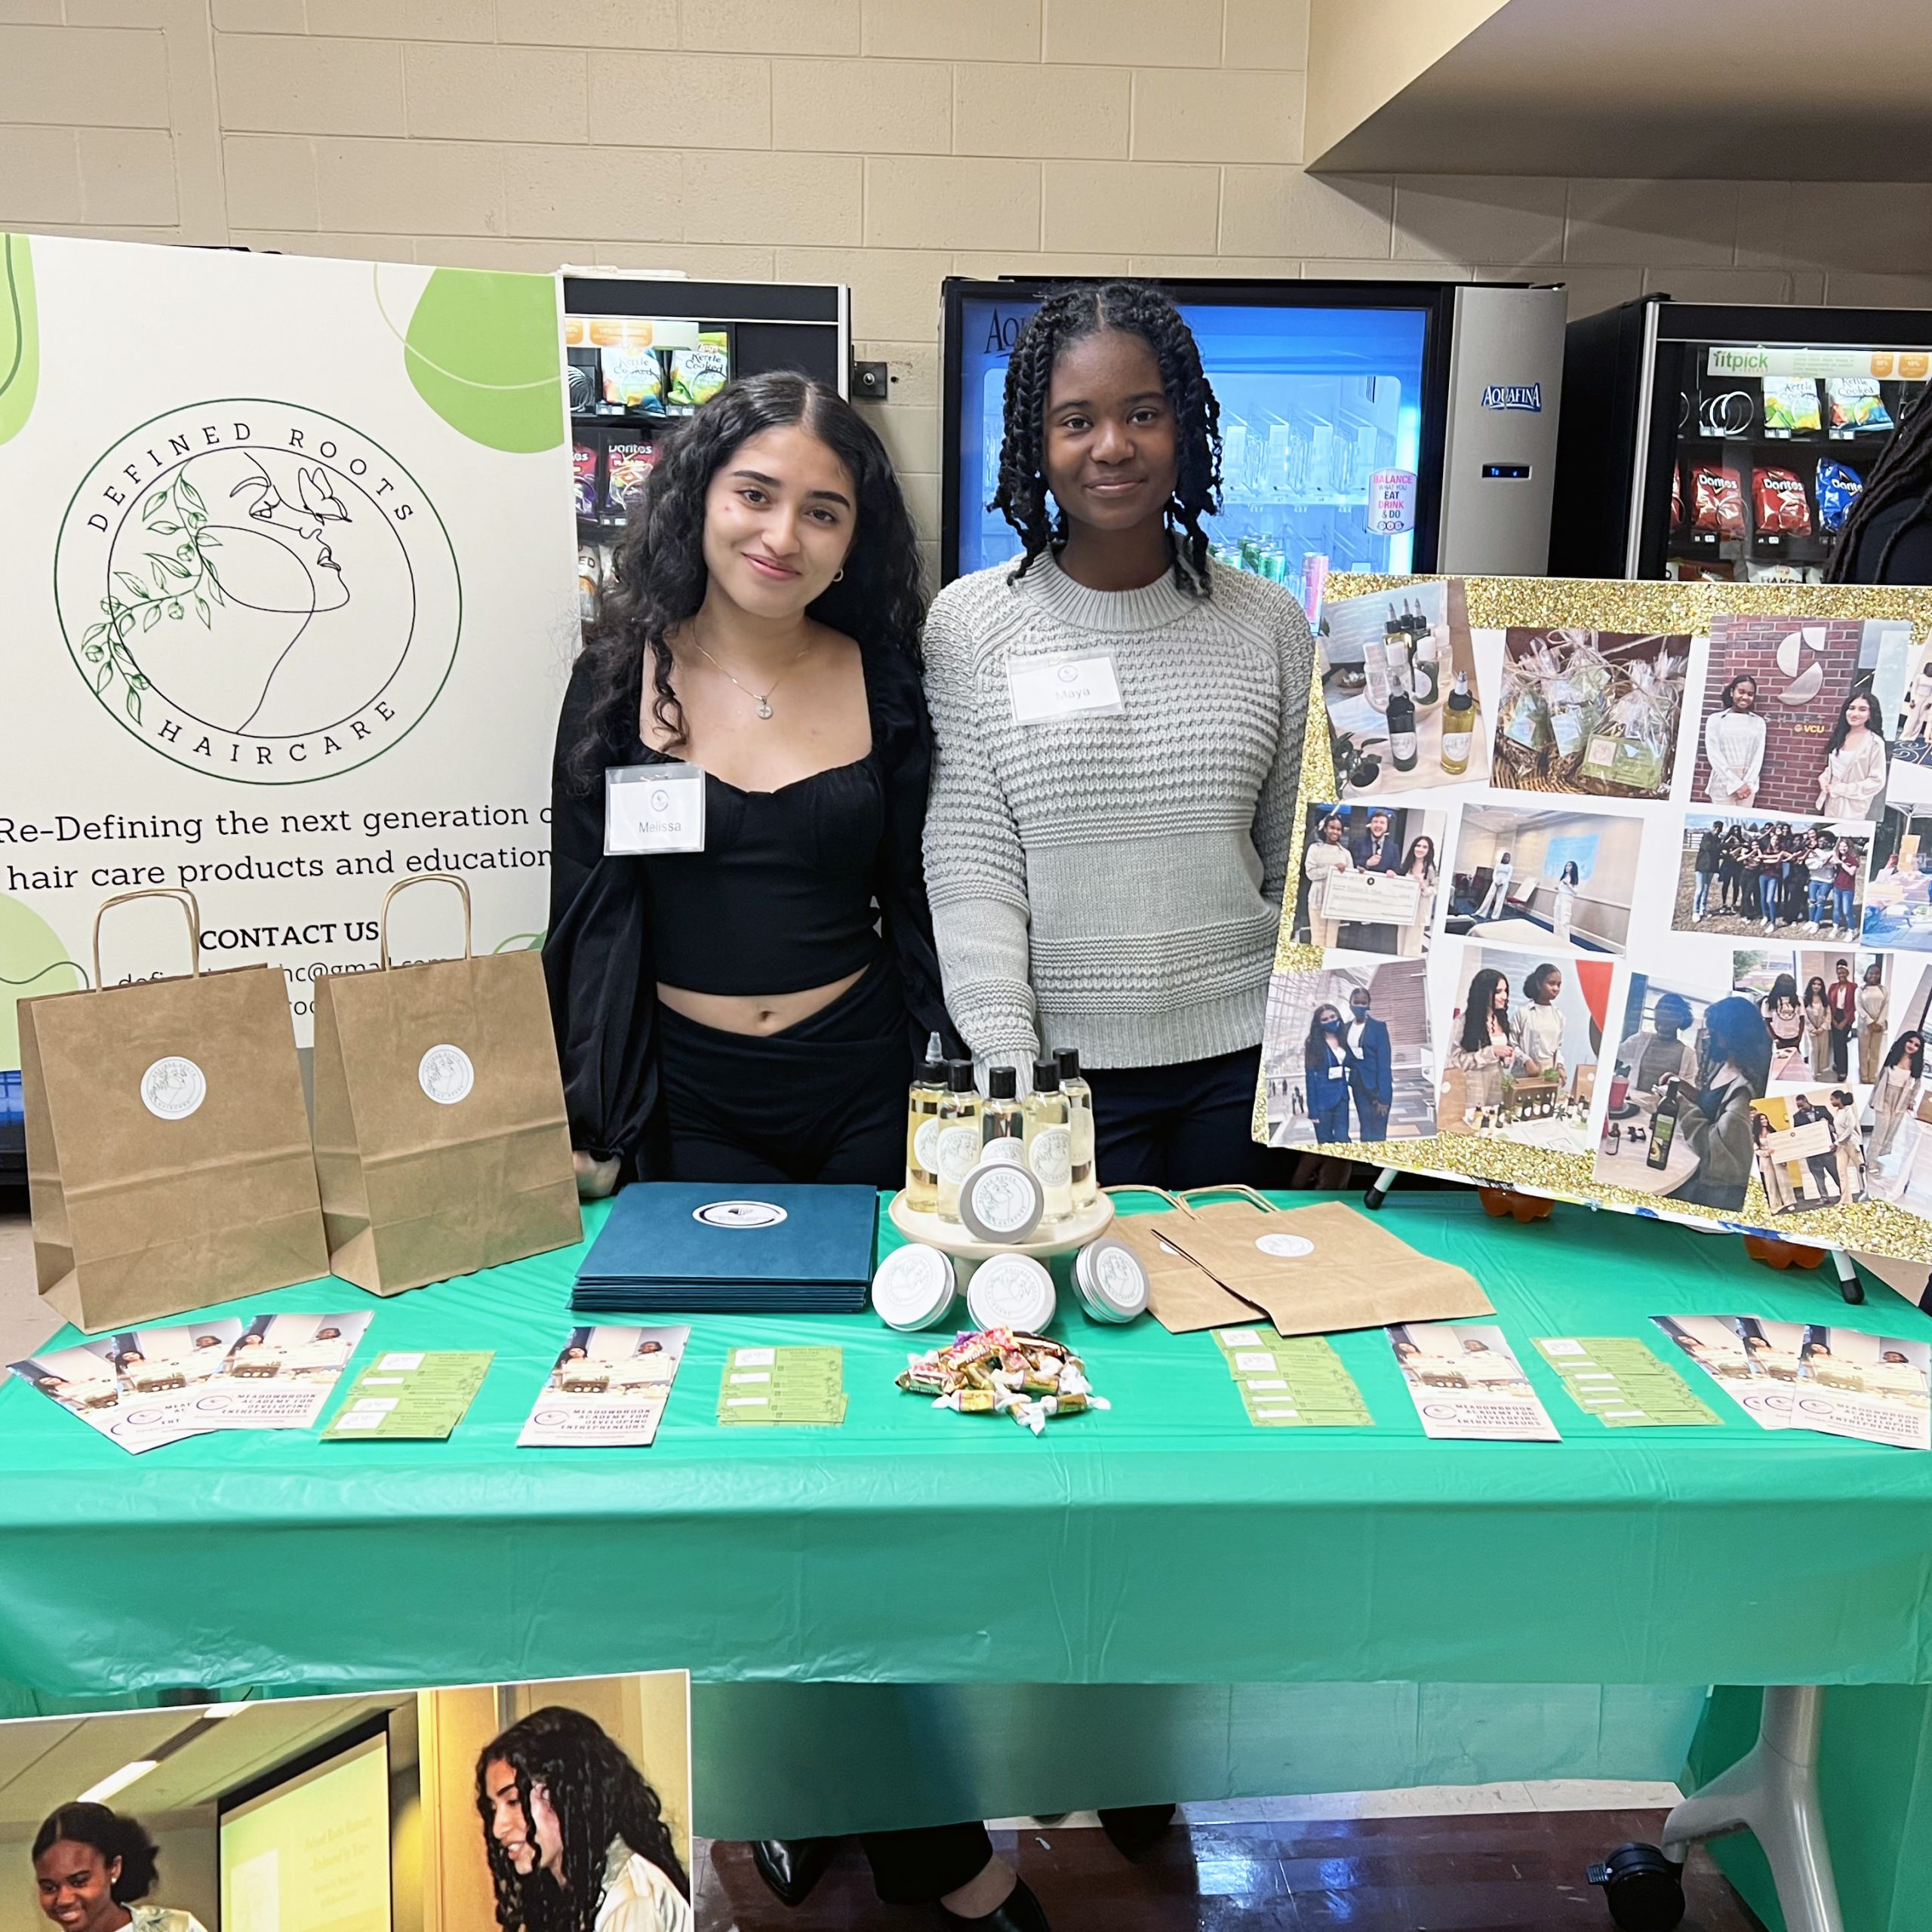 Two female students at a career fair show off their ideas at their table with signs and products.